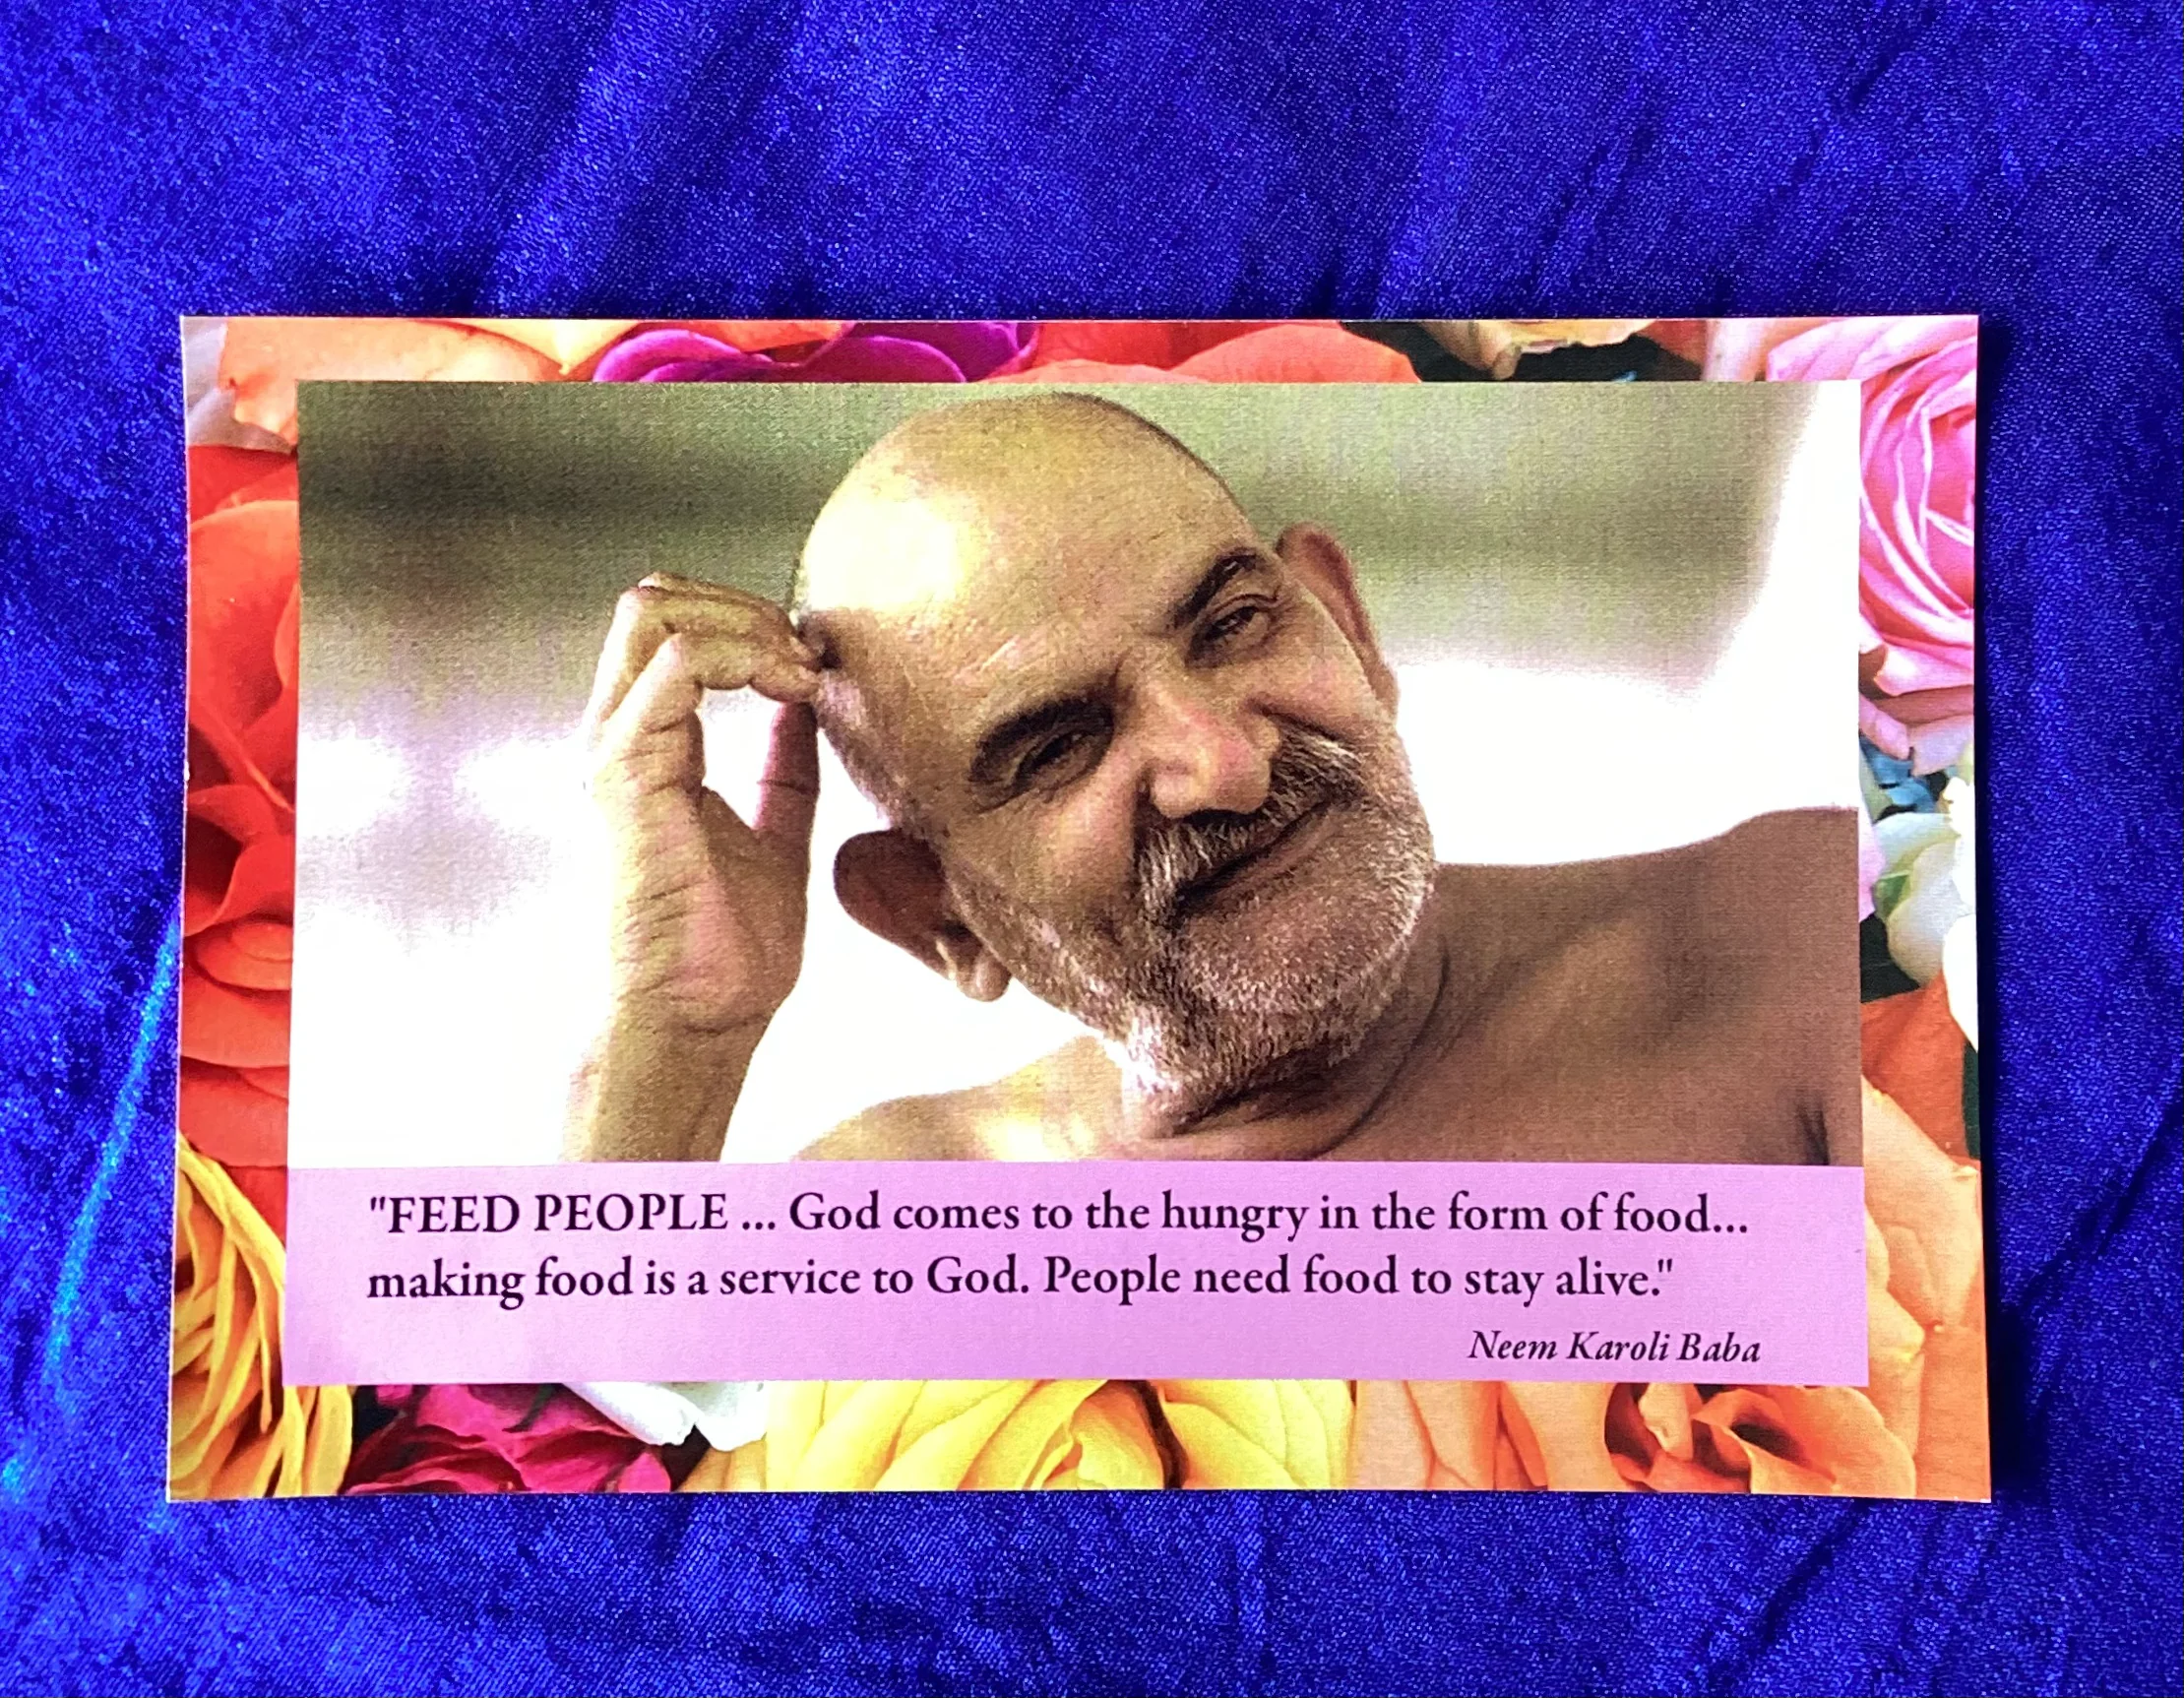 far Efe

"FEED PEOPLE ... God comes to the hungry in the form of food...
making food is a service to God. People need food to stay alive."
Neem Karoli Baba

aR